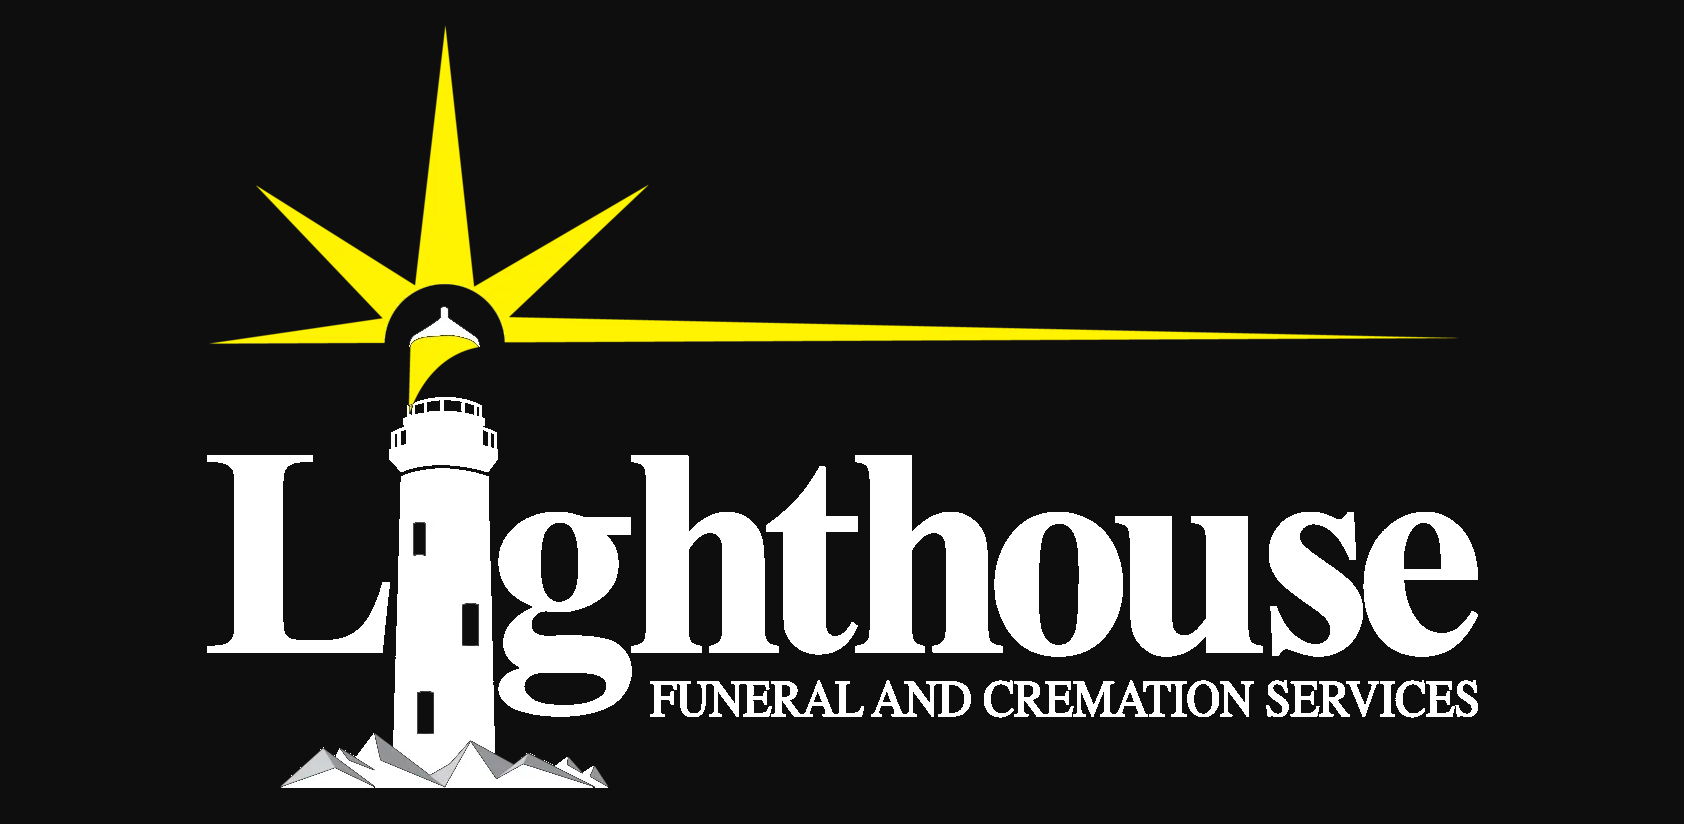 Lighthouse-Funeral-and-Cremation-Services.png